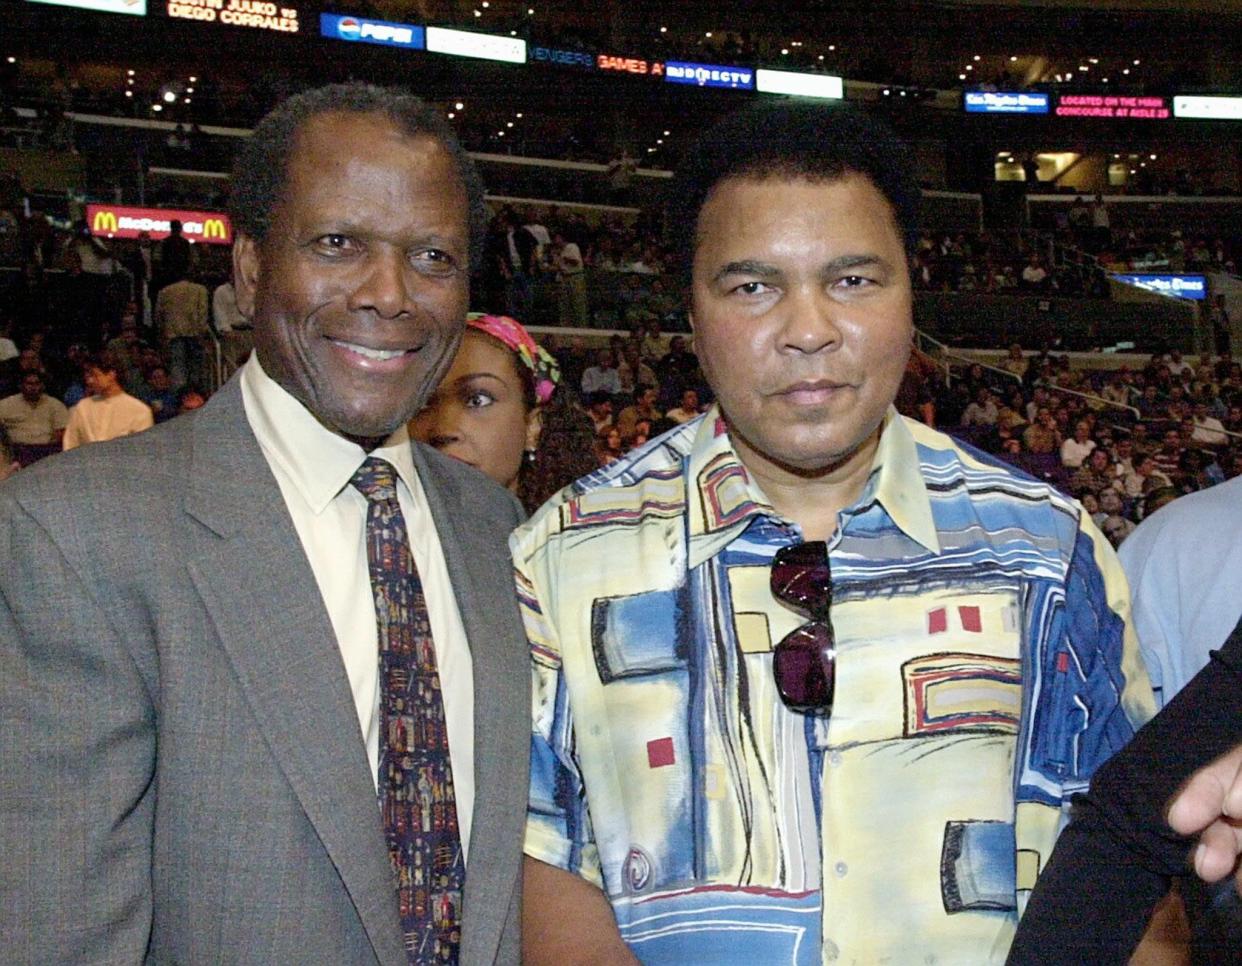 LOS ANGELES, UNITED STATES:  US former boxing heavyweight champion Muhammad Ali (R) meets actor Sidney Poitier (L) as they arrive to watch the WBC welterweight championship between Shane 